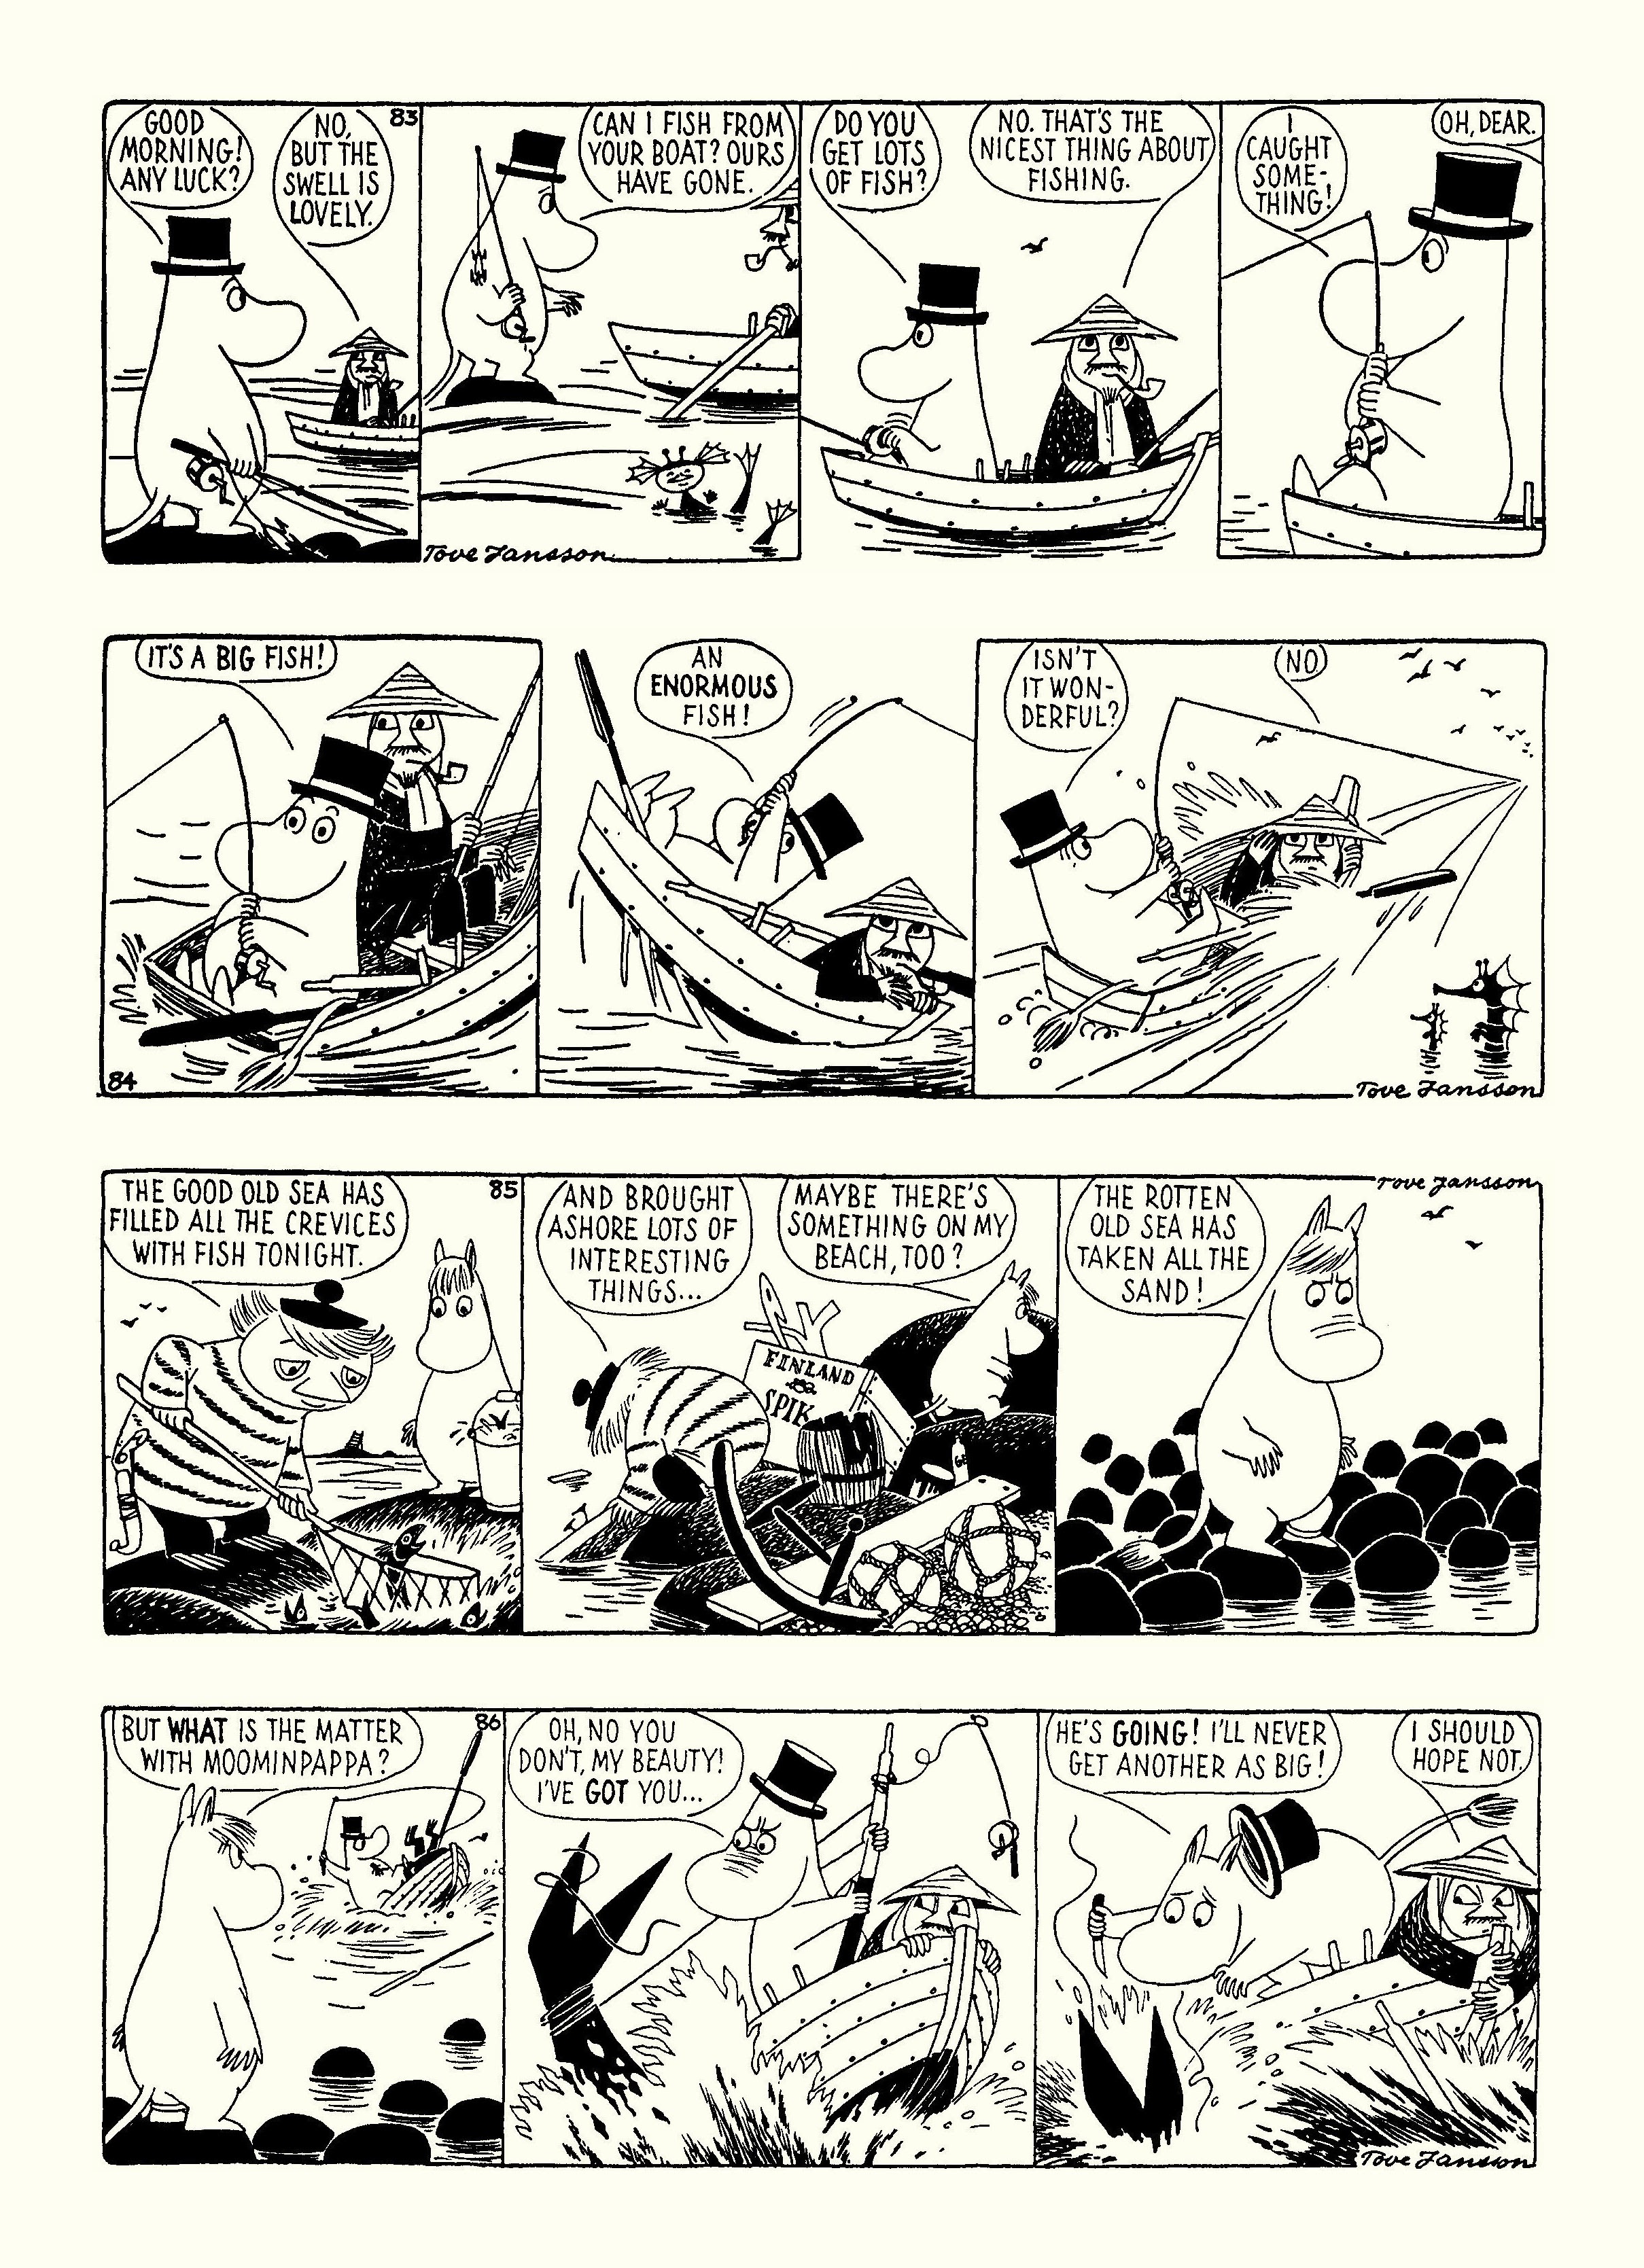 Read online Moomin: The Complete Tove Jansson Comic Strip comic -  Issue # TPB 3 - 76